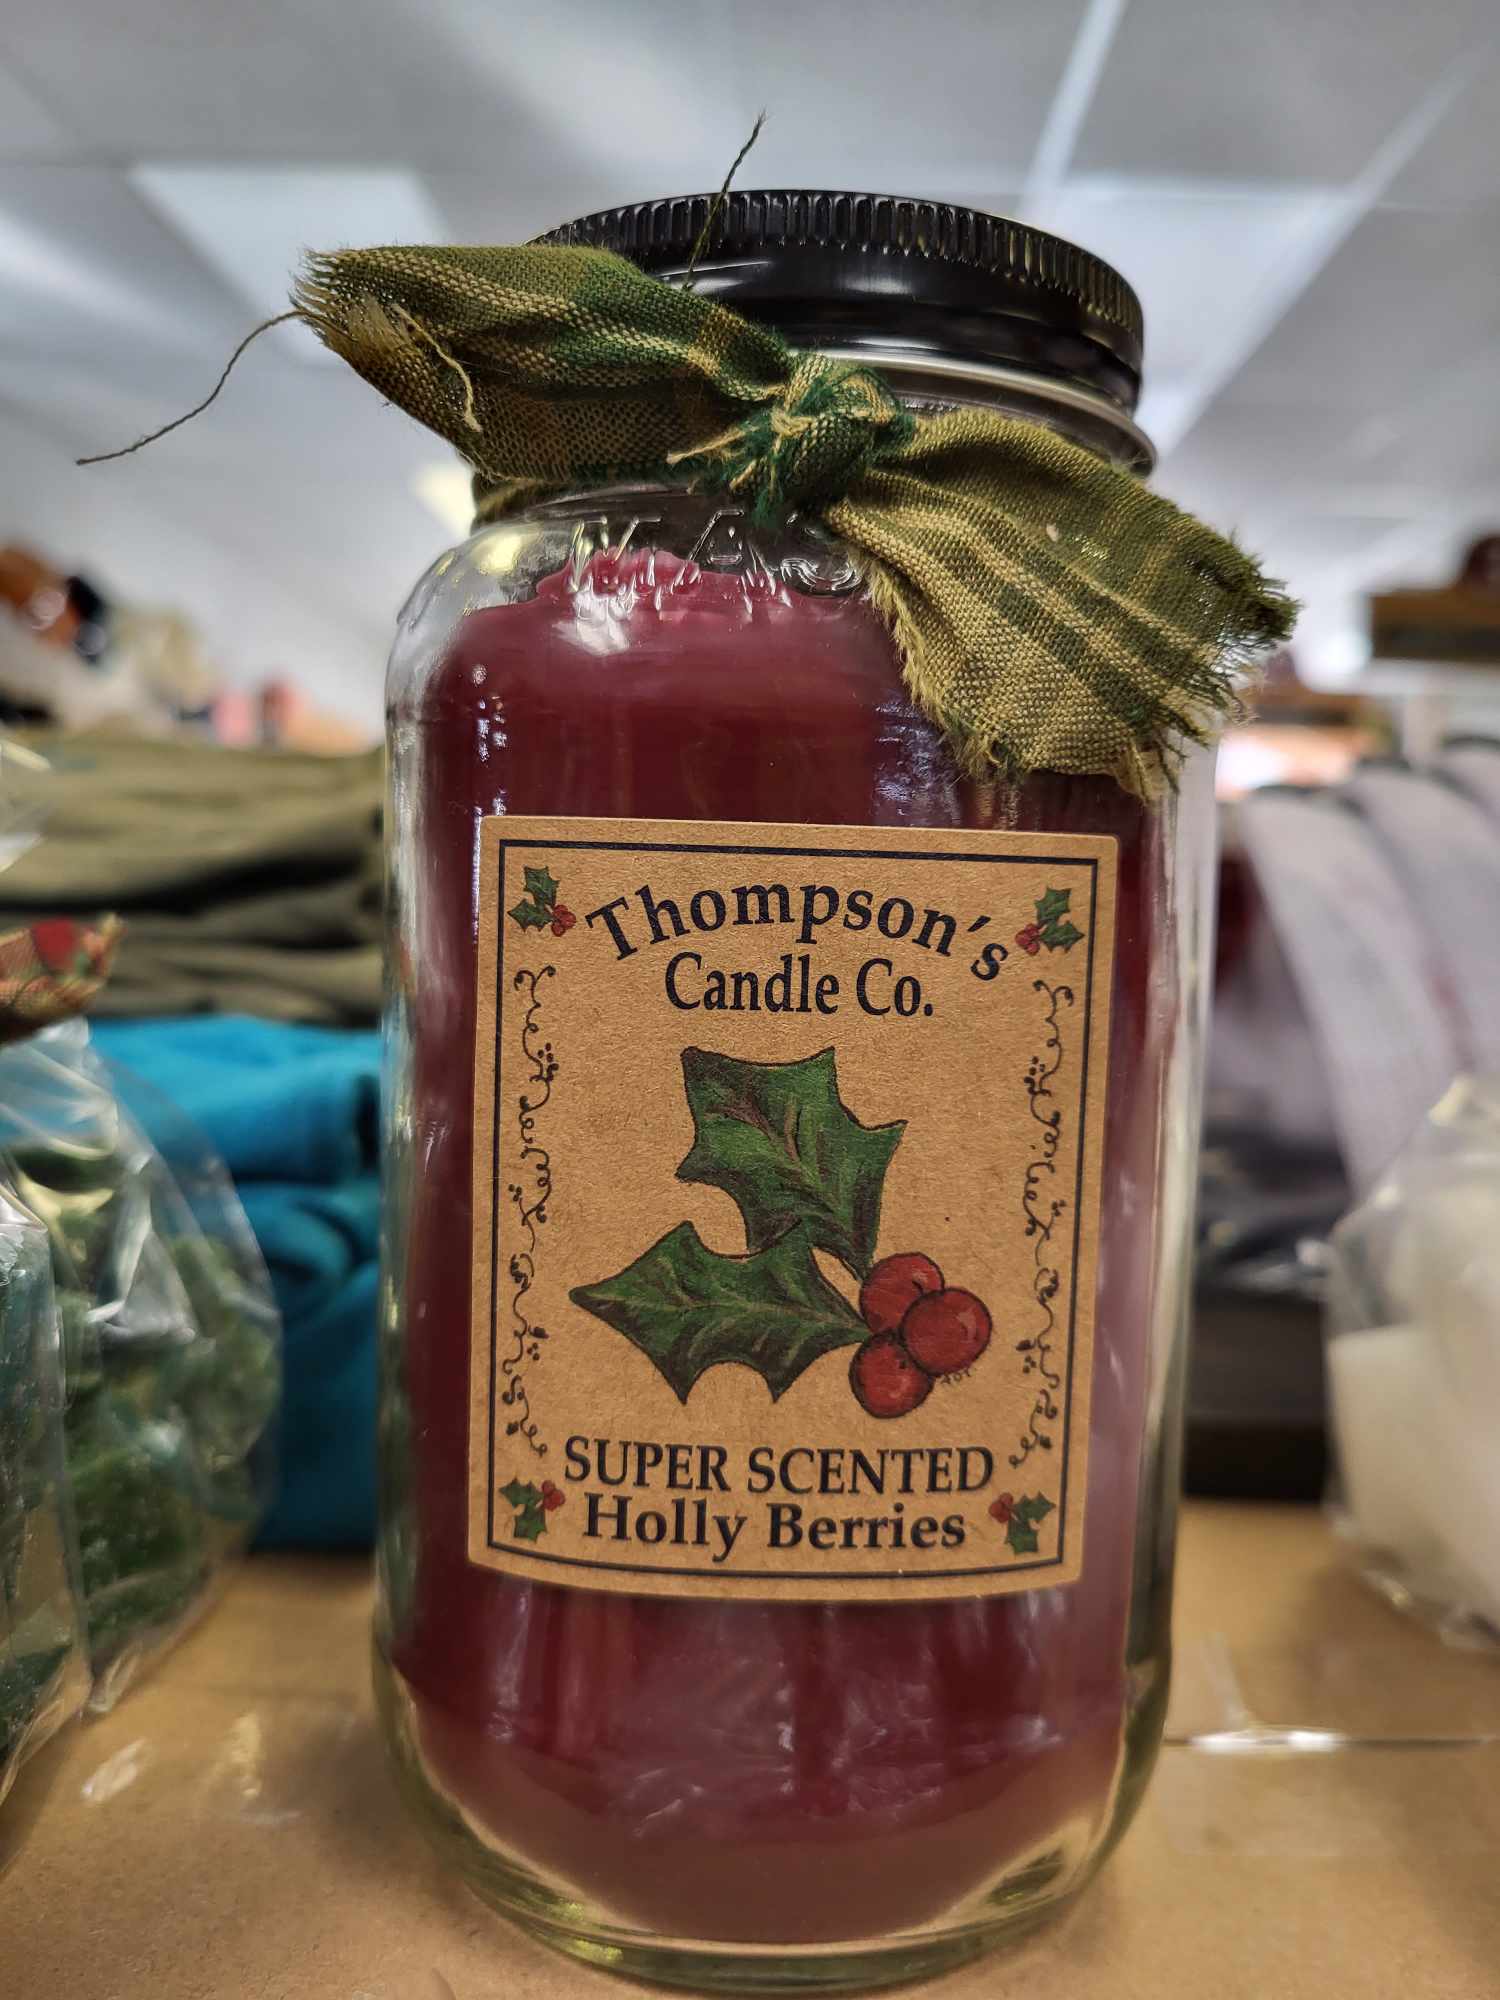 Thompson's Candle Co. Super Scented Holly Berries 20oz Mason Jar